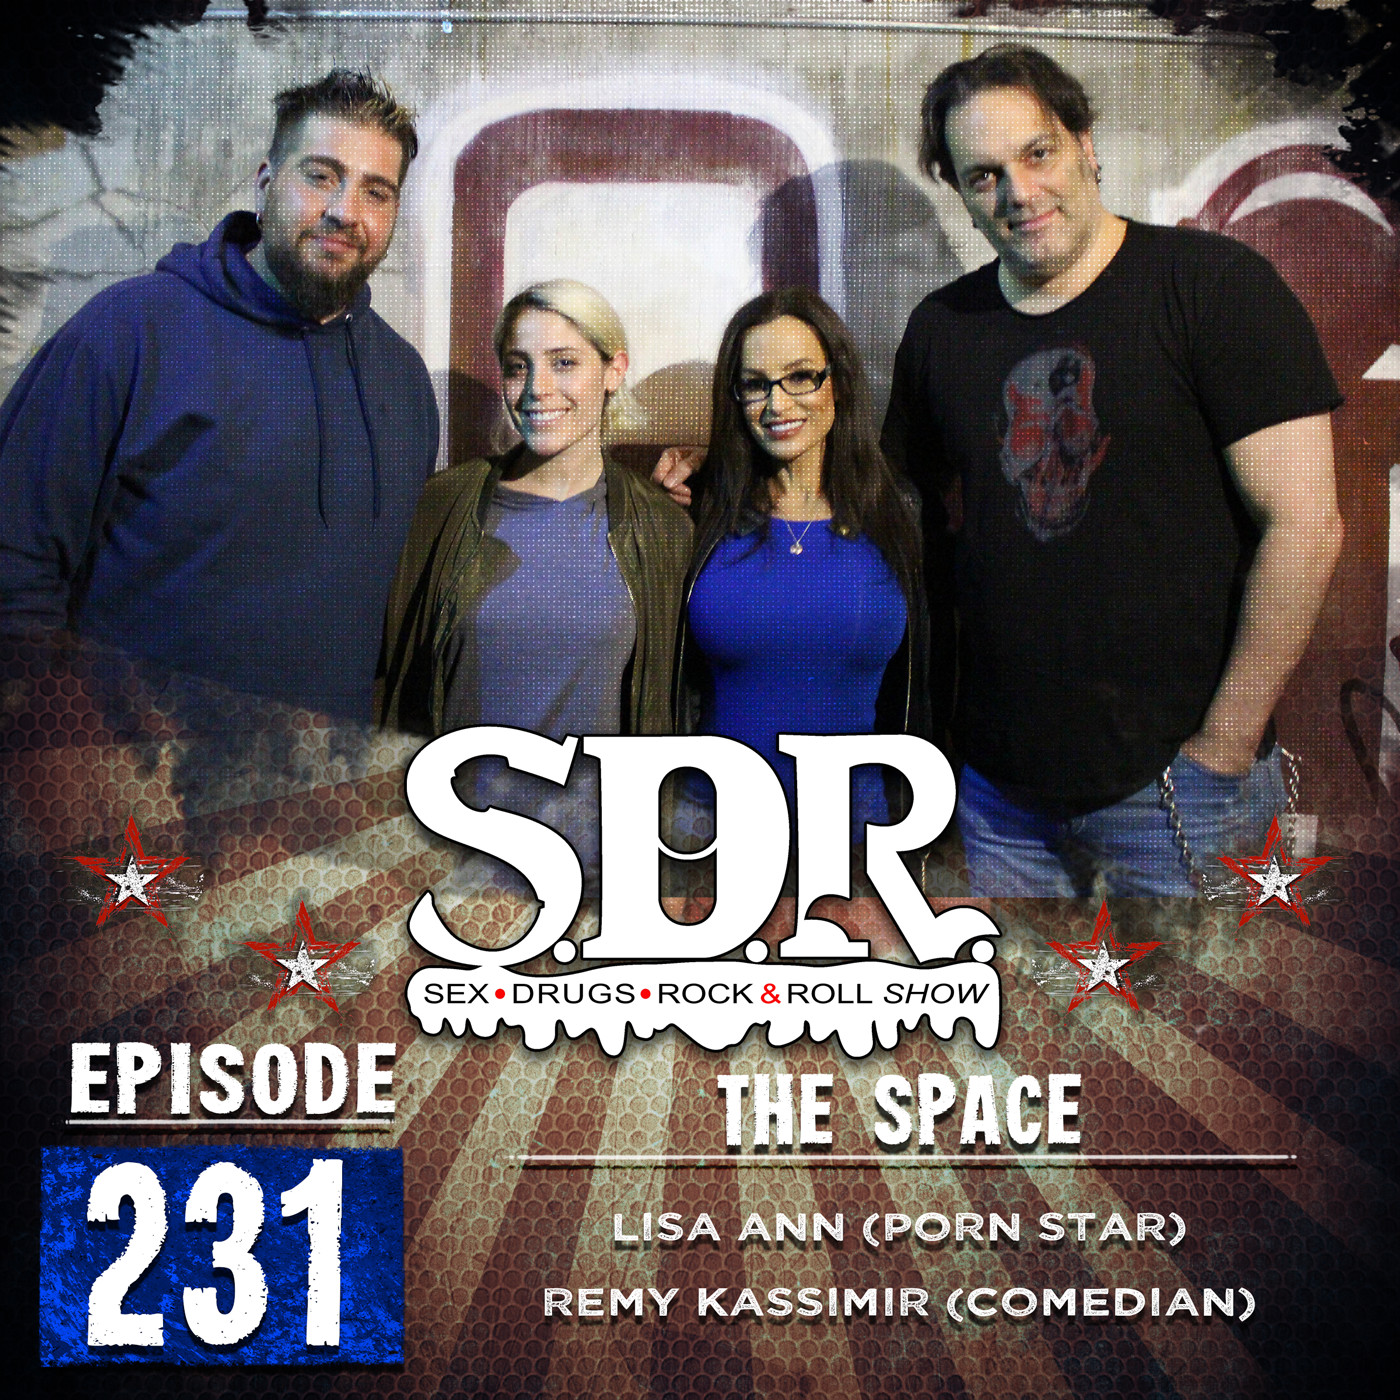 Lisa Ann & Remy Kassimir (Porn Star & Comedian) - The Space by The SDR Show  (Sex, Drugs, & Rock-n-Roll Show) w/Ralph Sutton & Big Jay Oakerson |  Podchaser